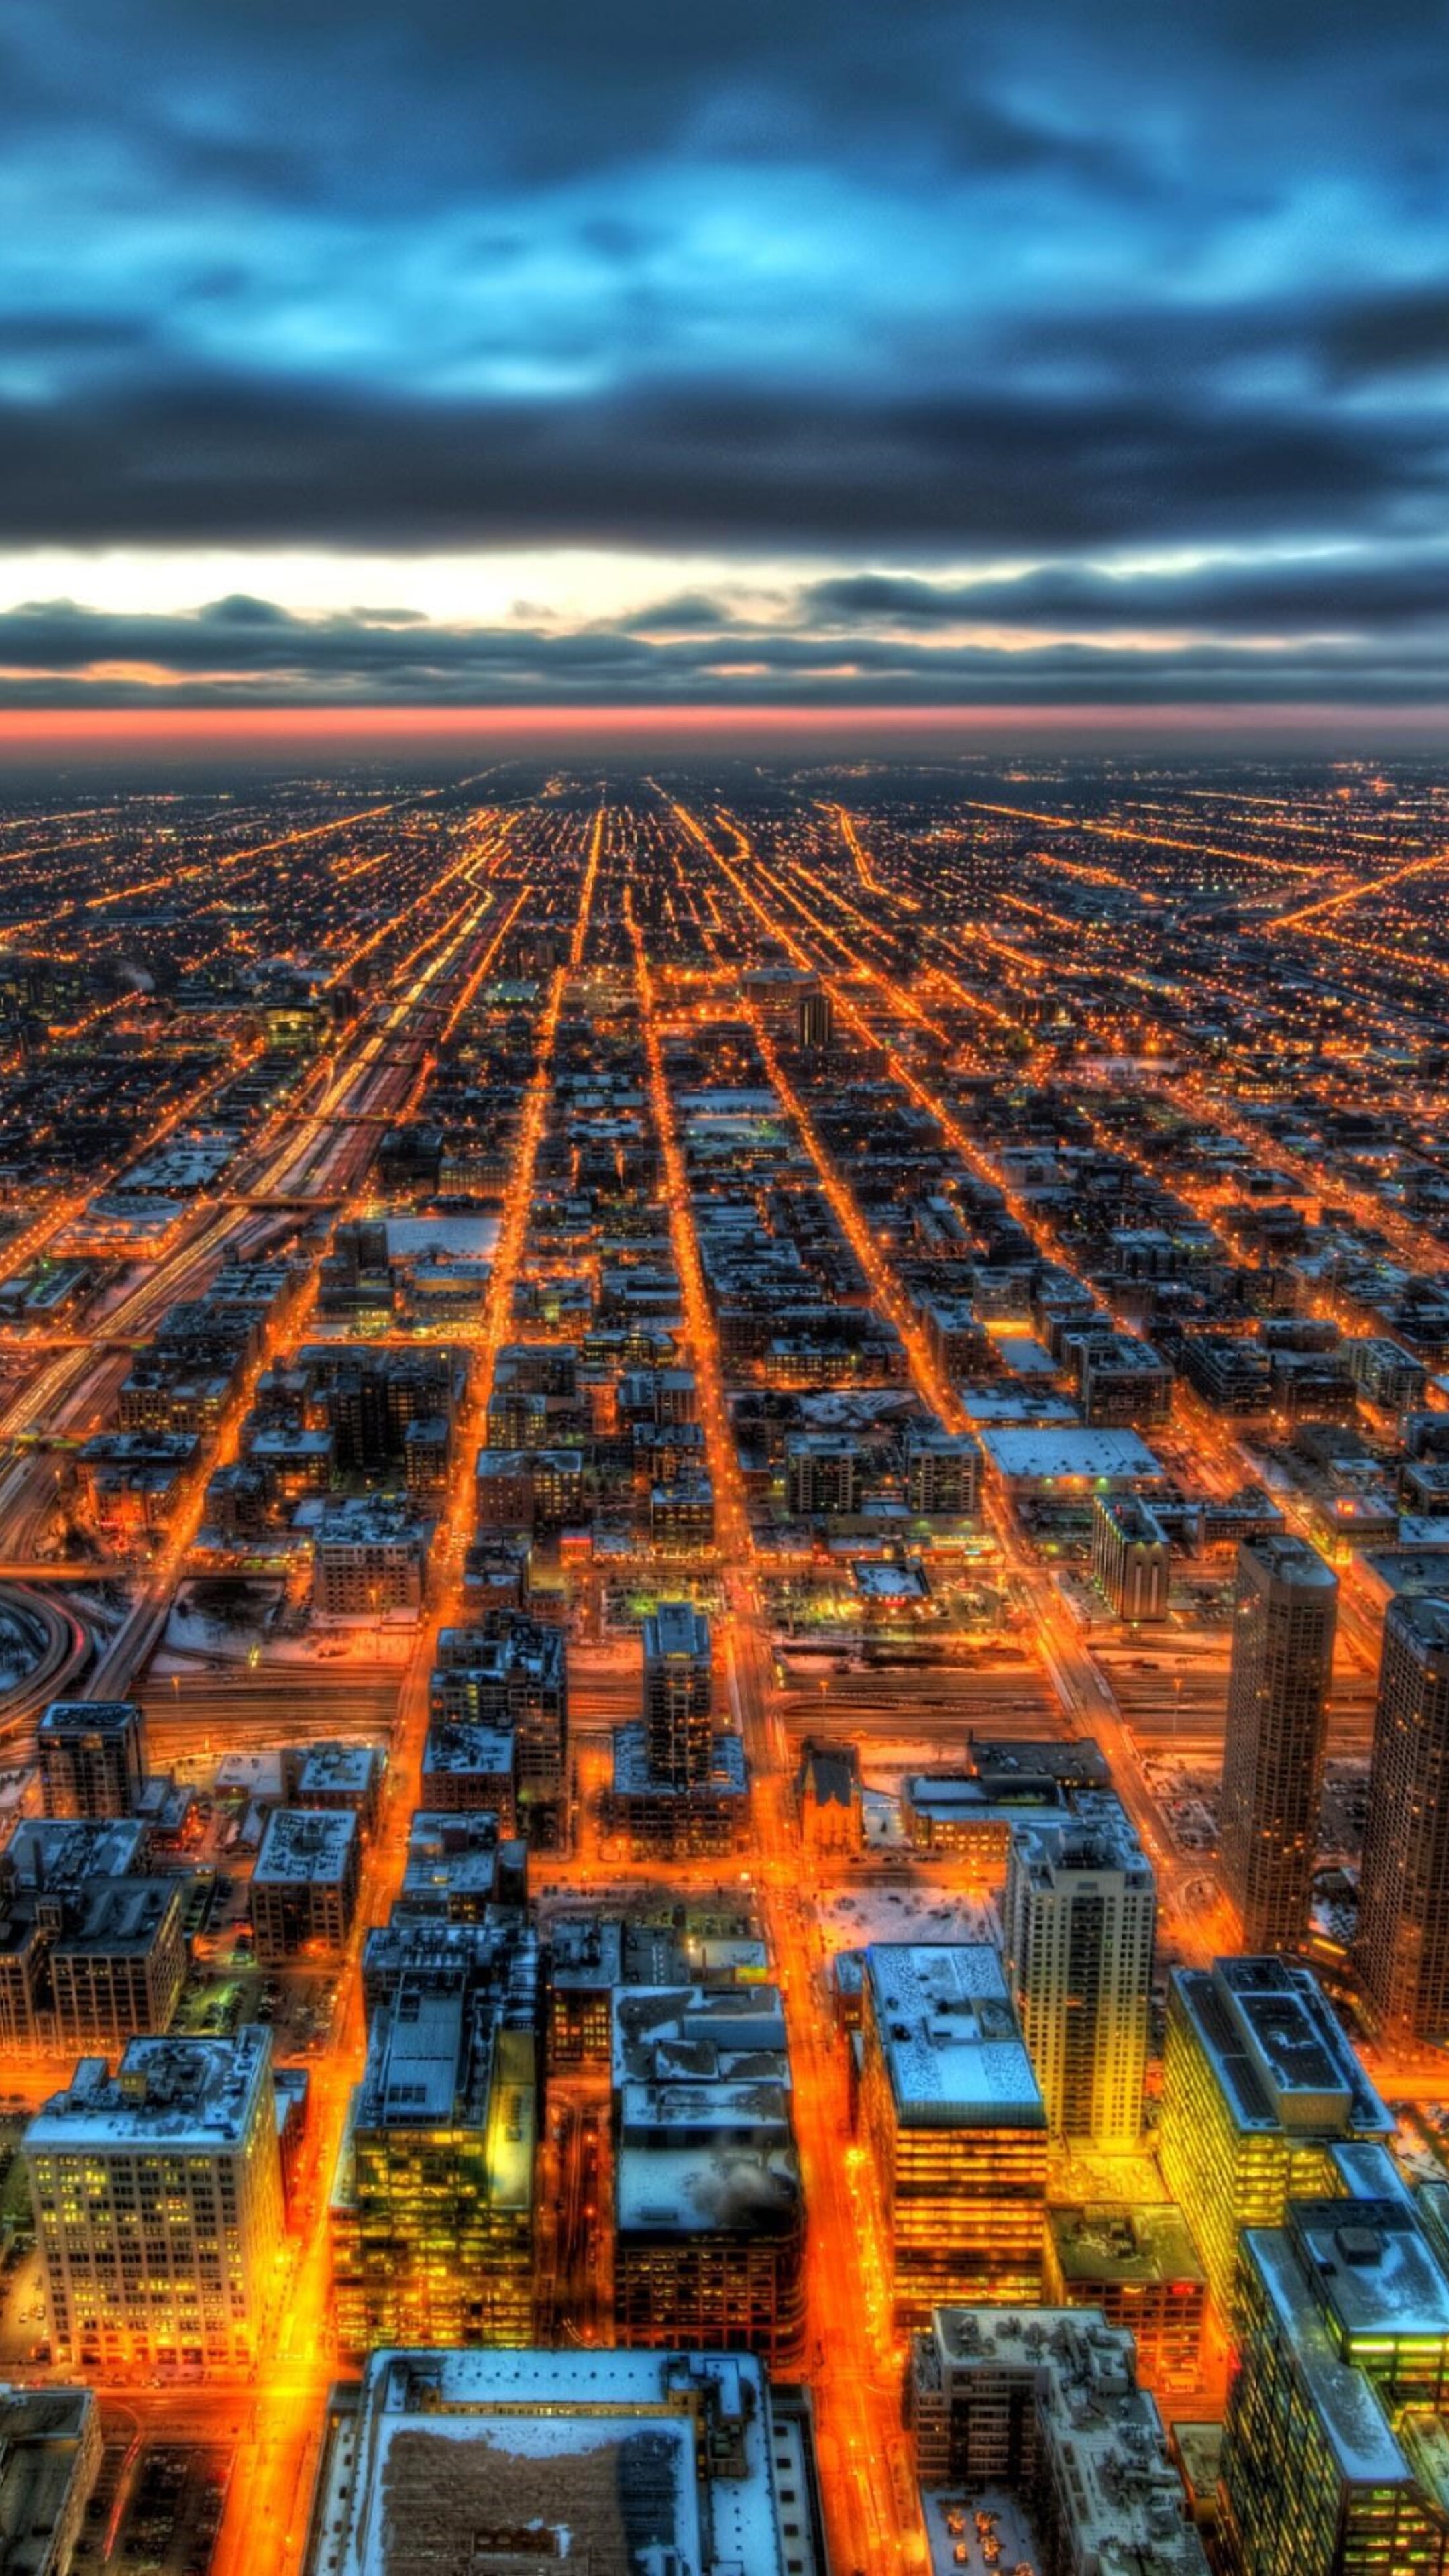 Chicago: Was the fifth-largest city in the world by 1900, Streetscape. 2160x3840 4K Wallpaper.